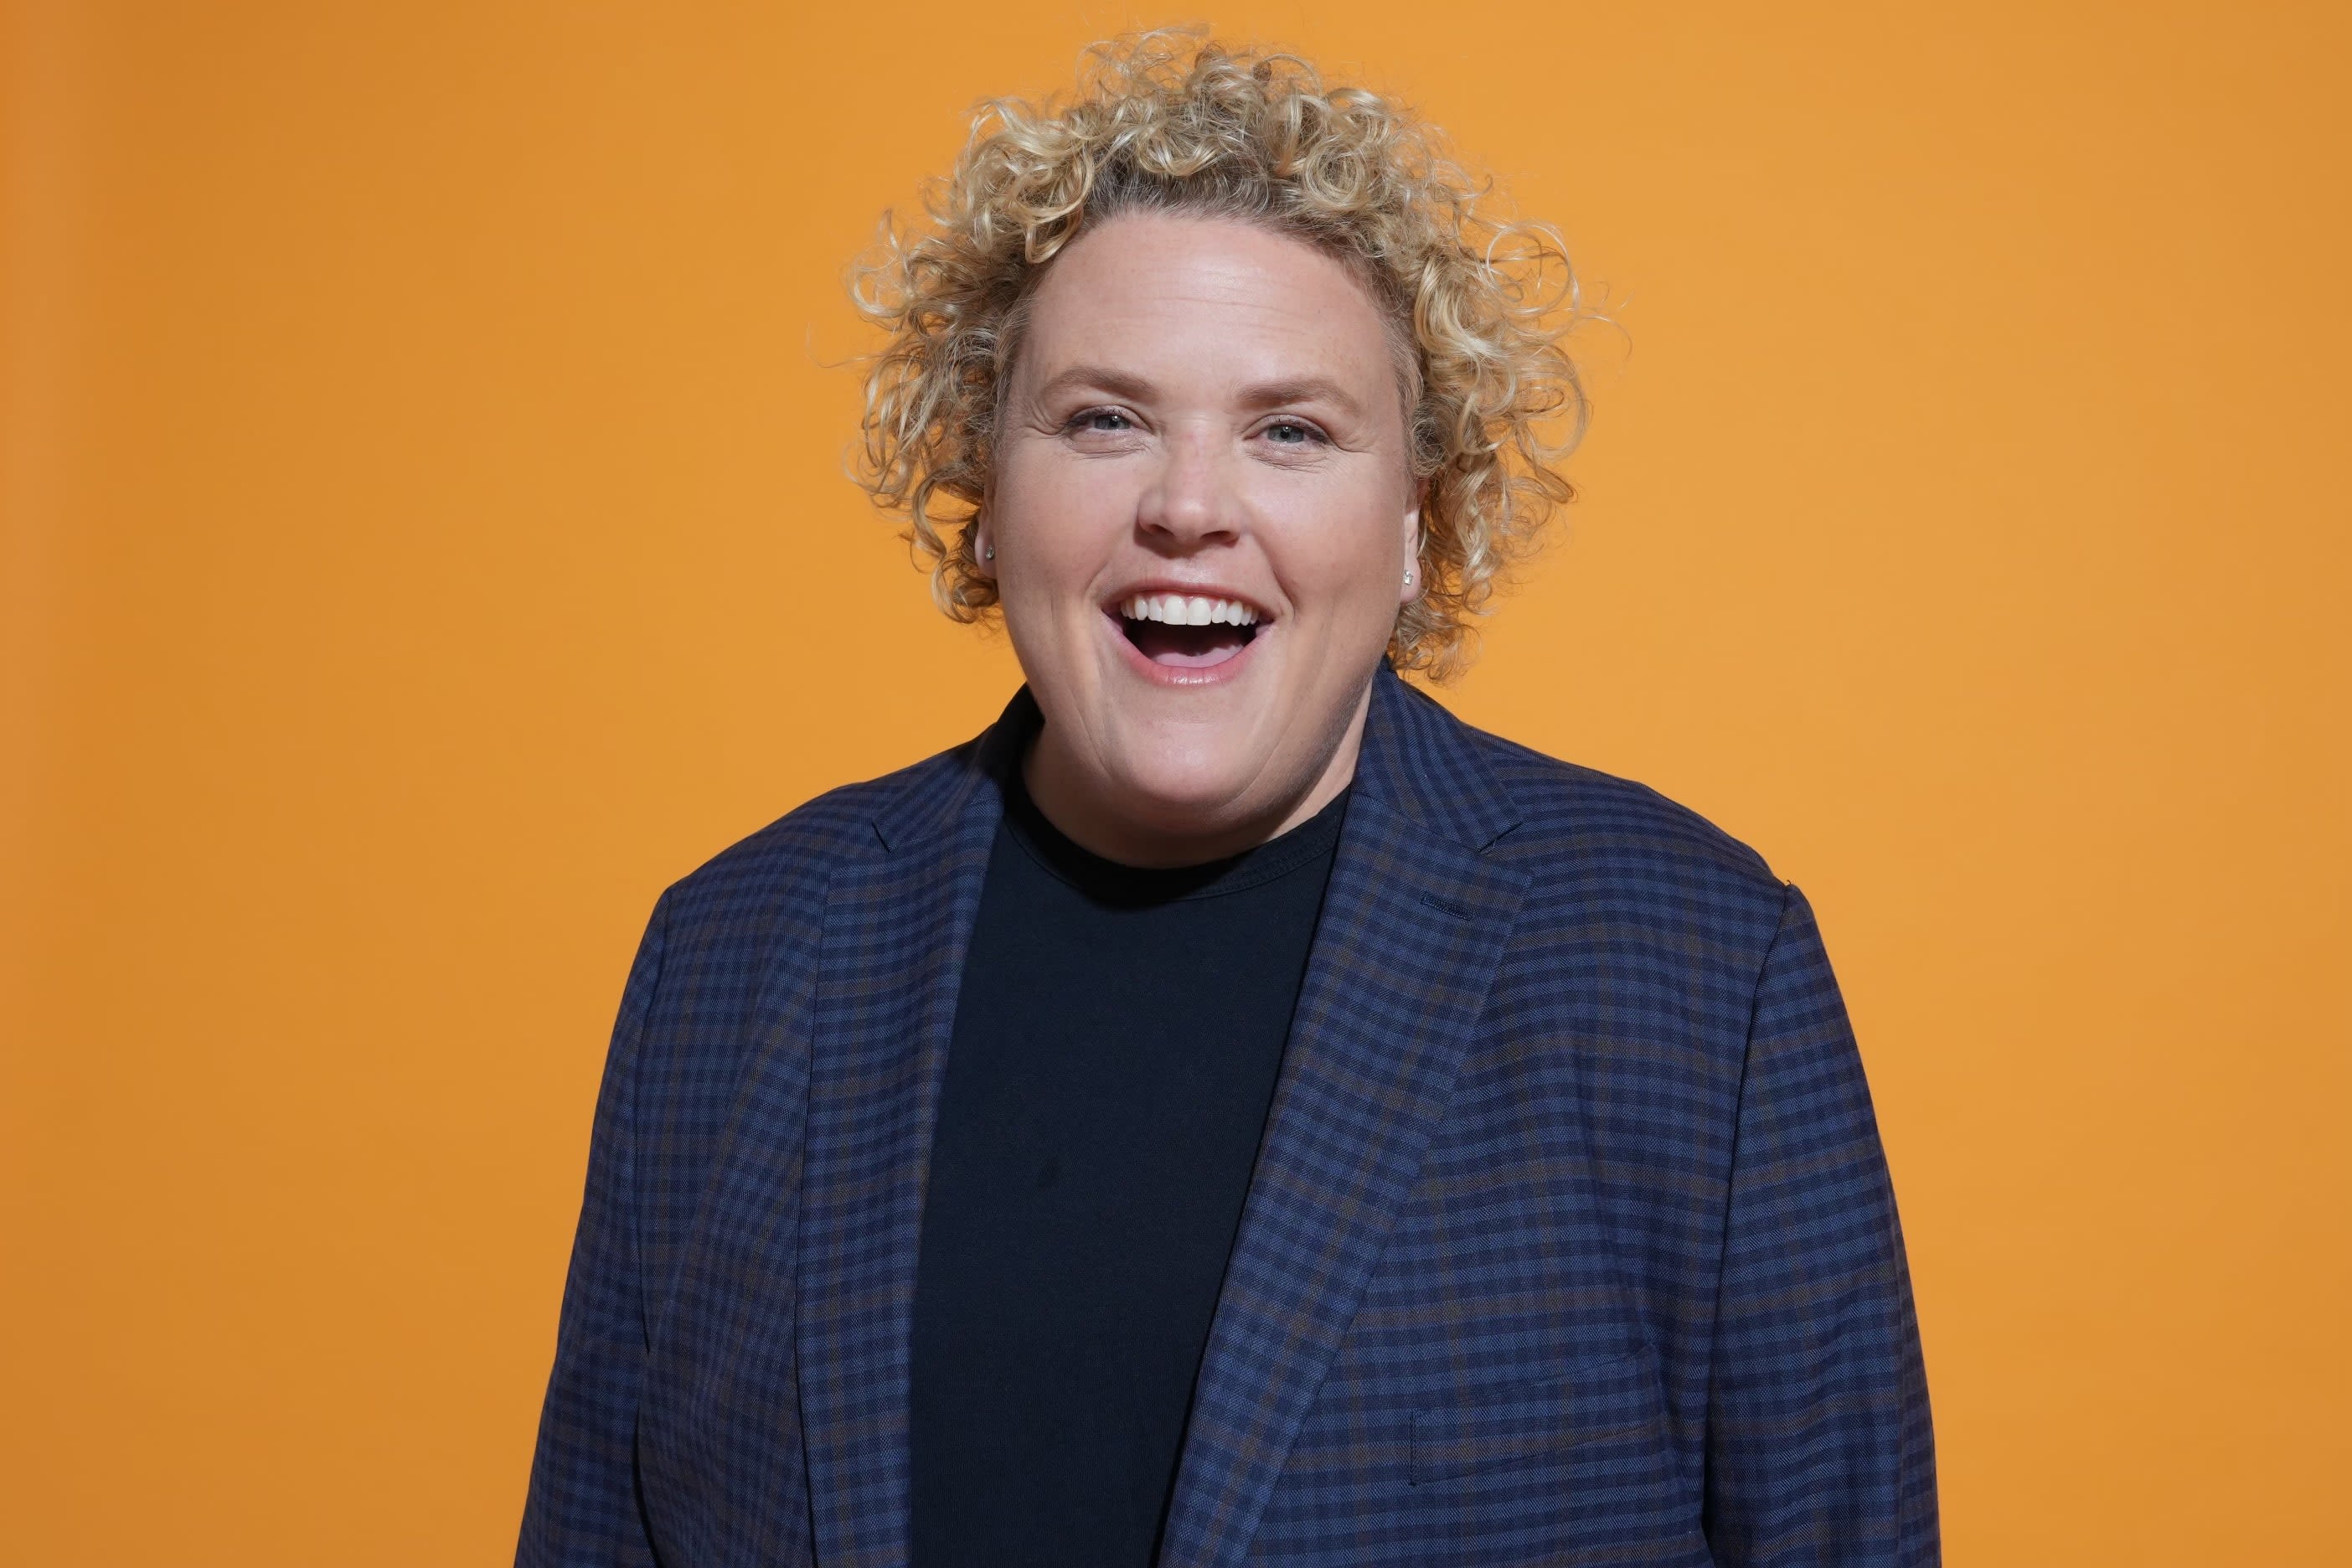 UTA Signs Comedian, Writer & Actor Fortune Feimster